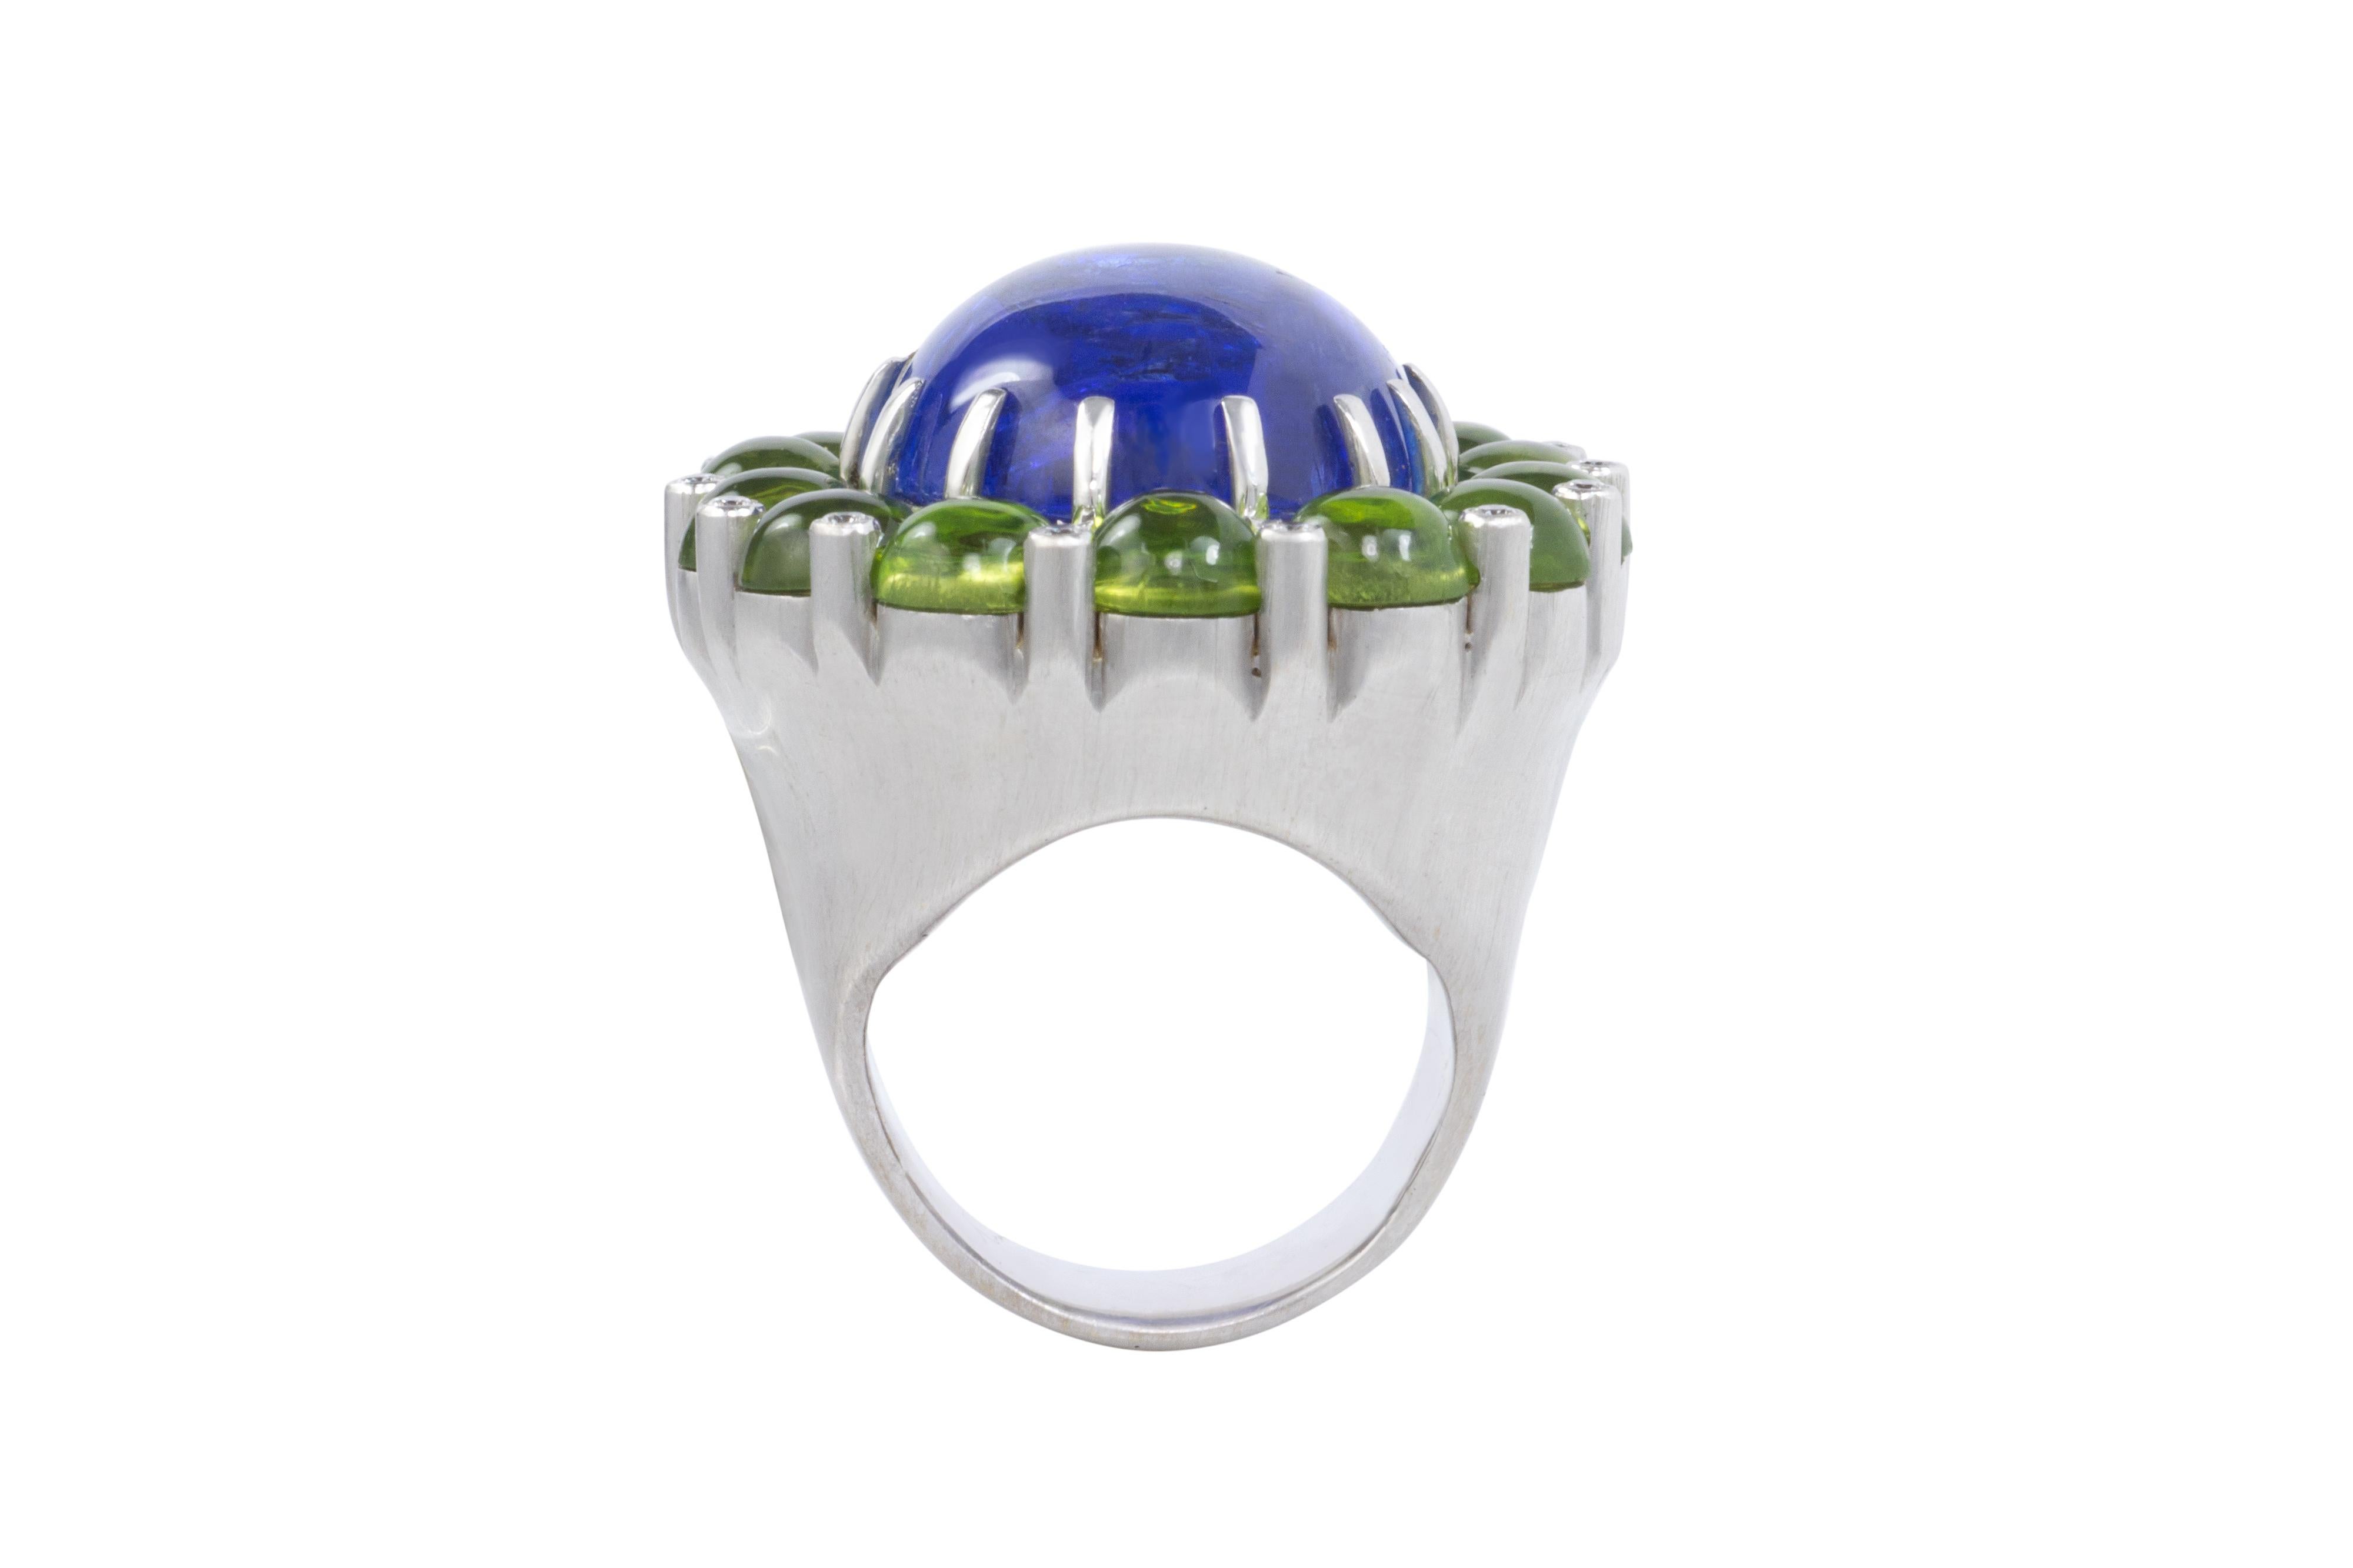 A tanzanite, peridot, diamond and 14 karat white gold ring. The ring is a size 5.5 and measures 1.5